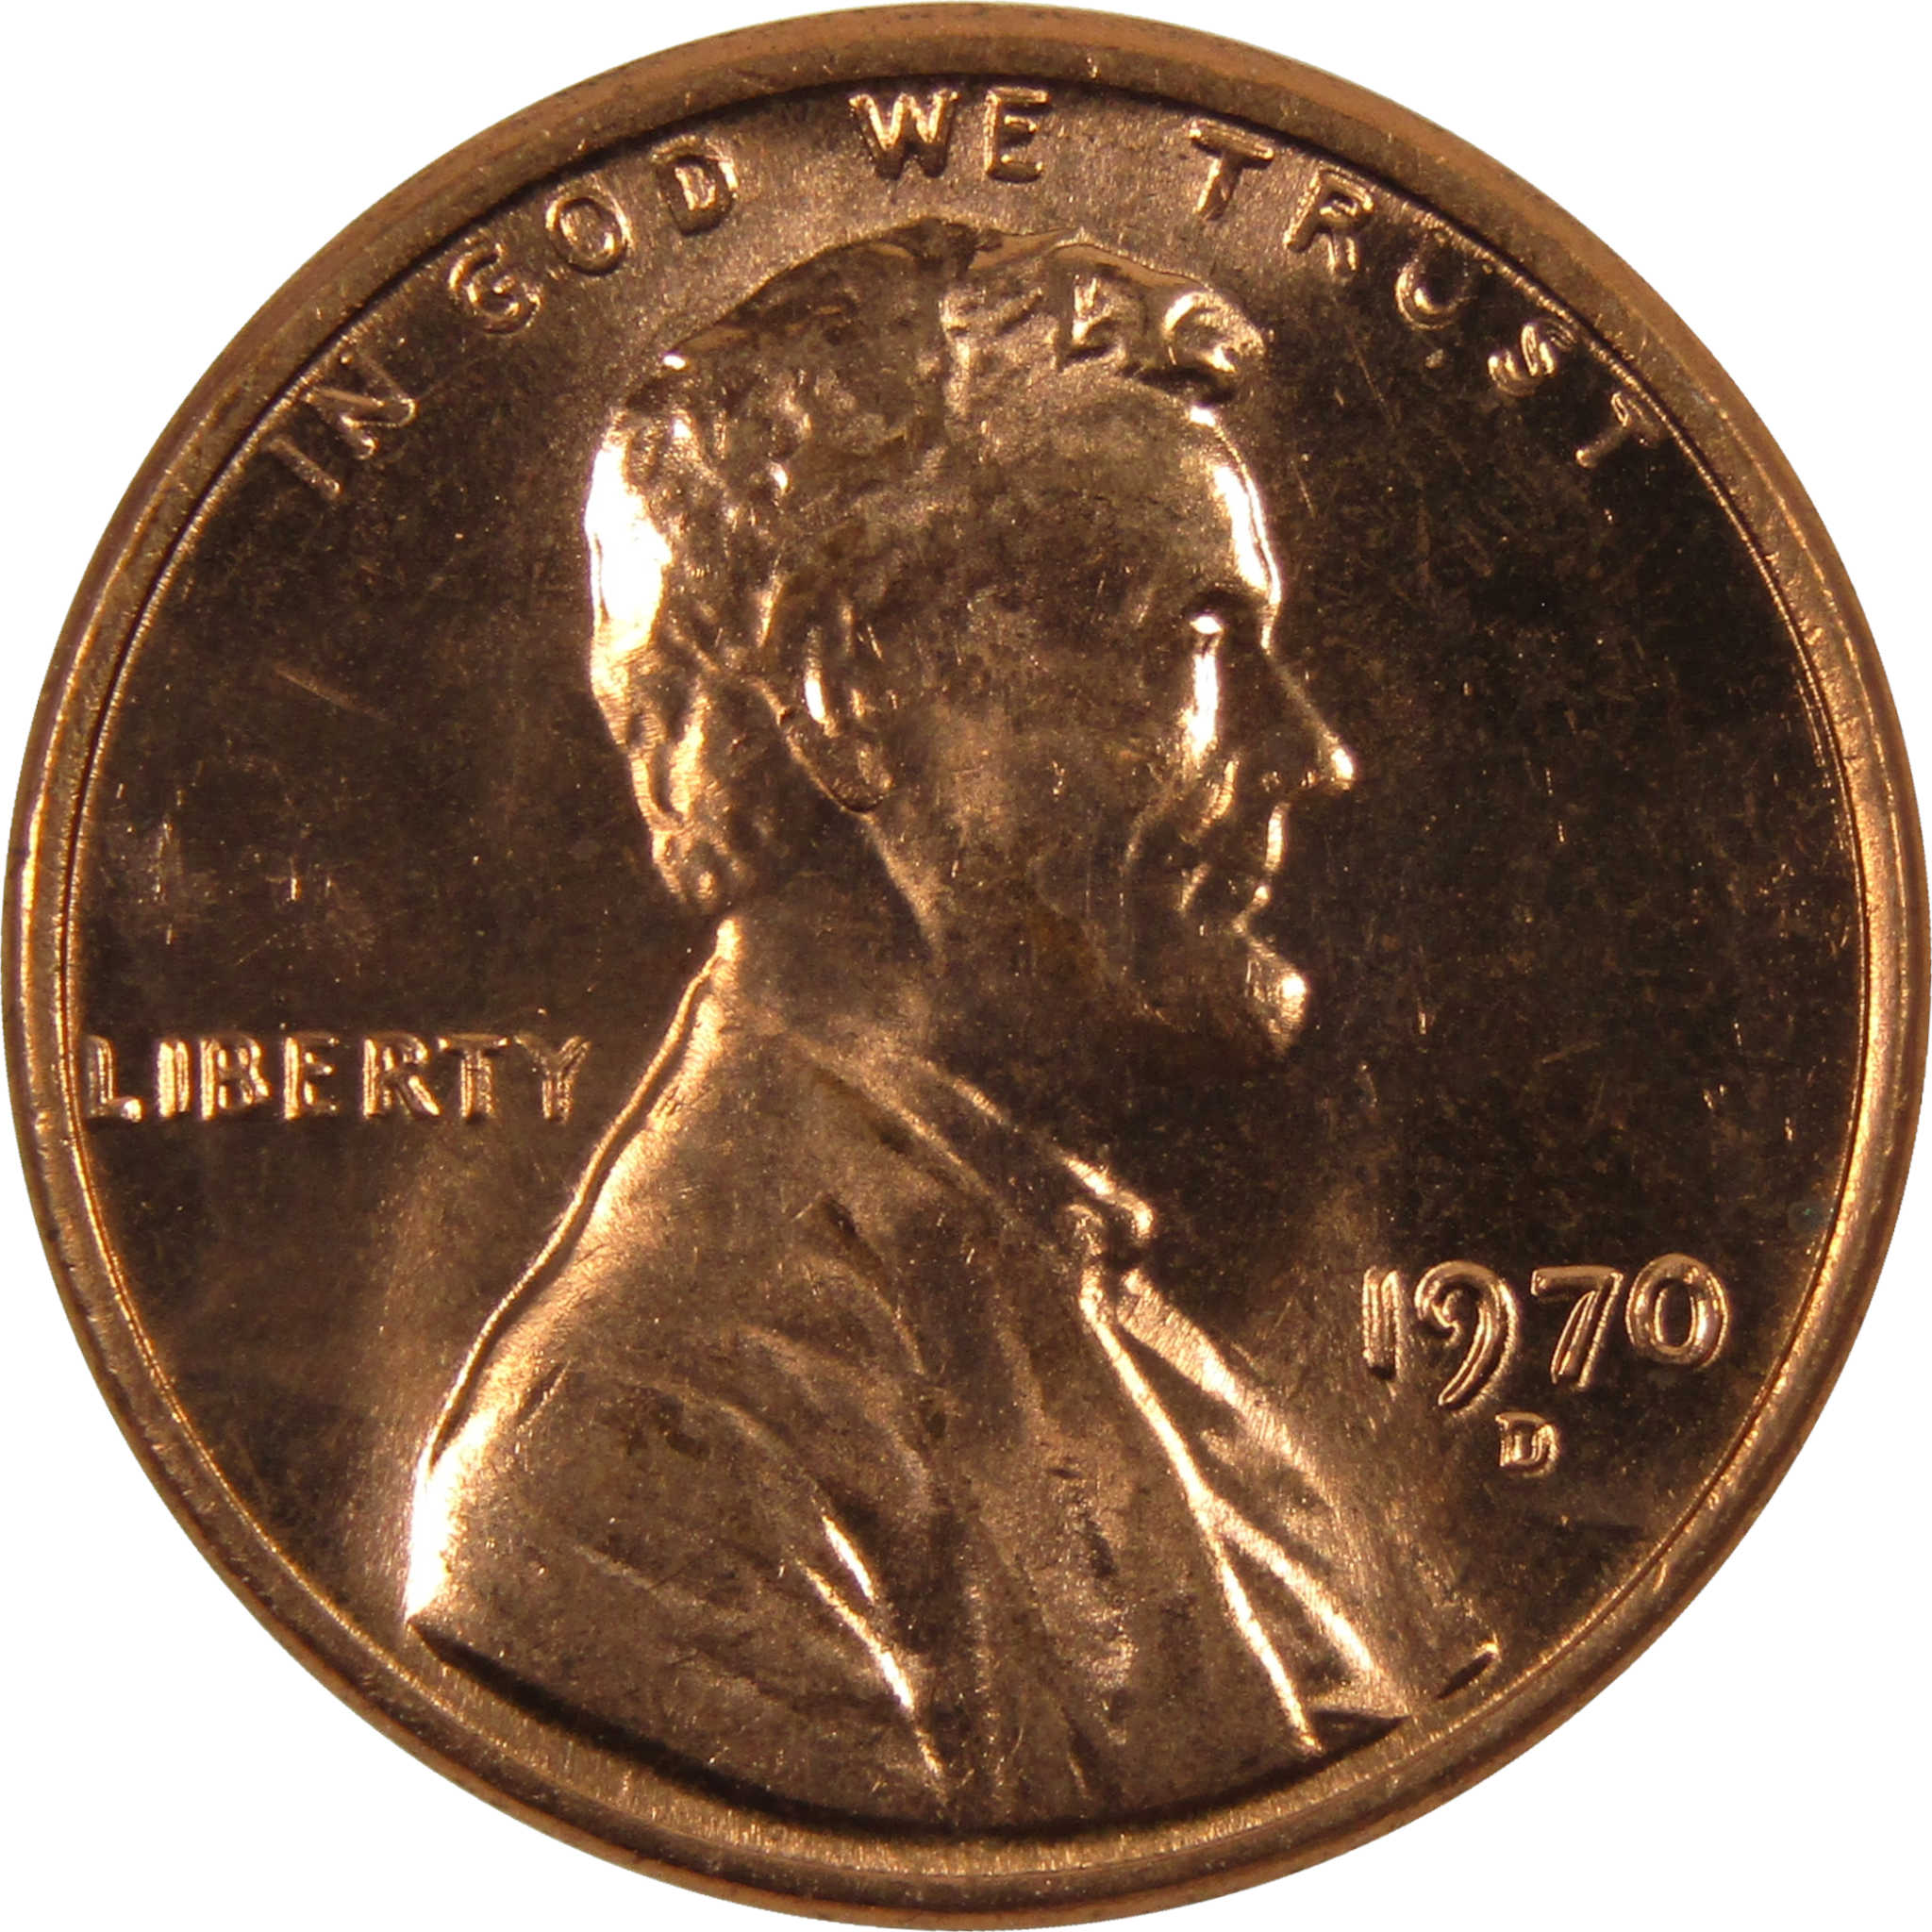 1970 D Lincoln Memorial Cent BU Uncirculated Penny 1c Coin